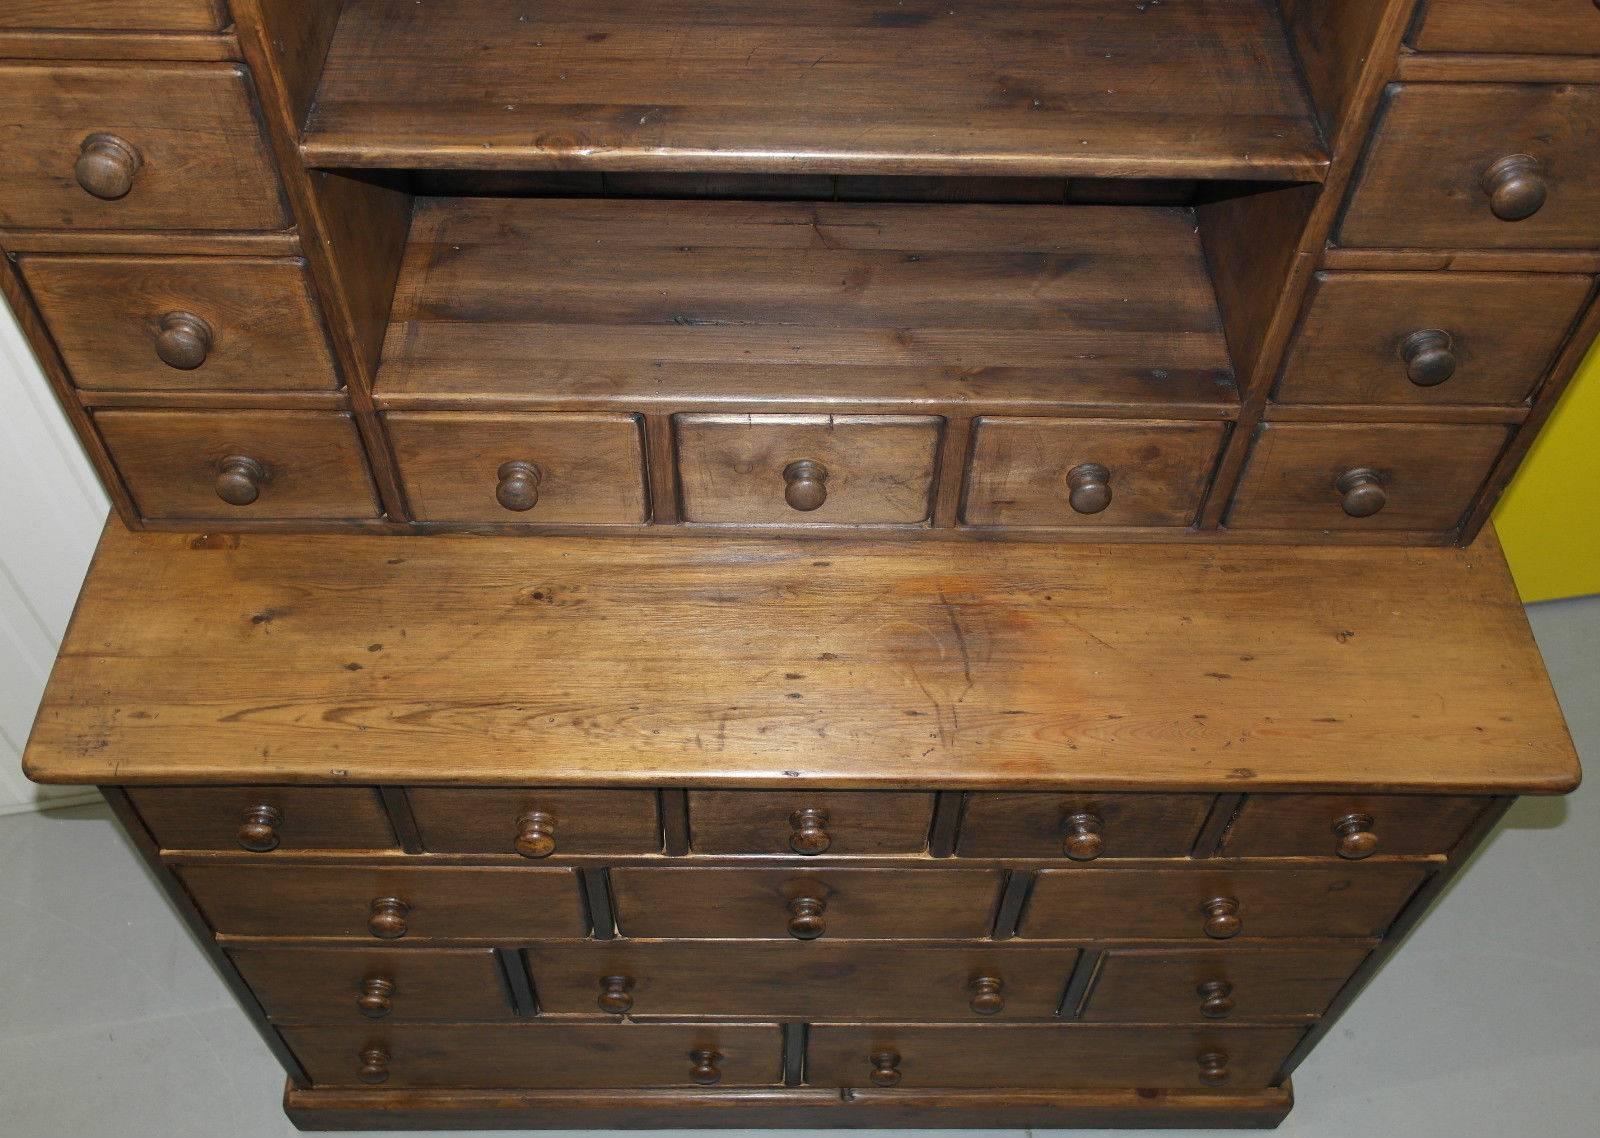 Hand-Carved Rare Victorian Merchants Apothecary Haberdashery Bank / Chest of Drawers Dresser